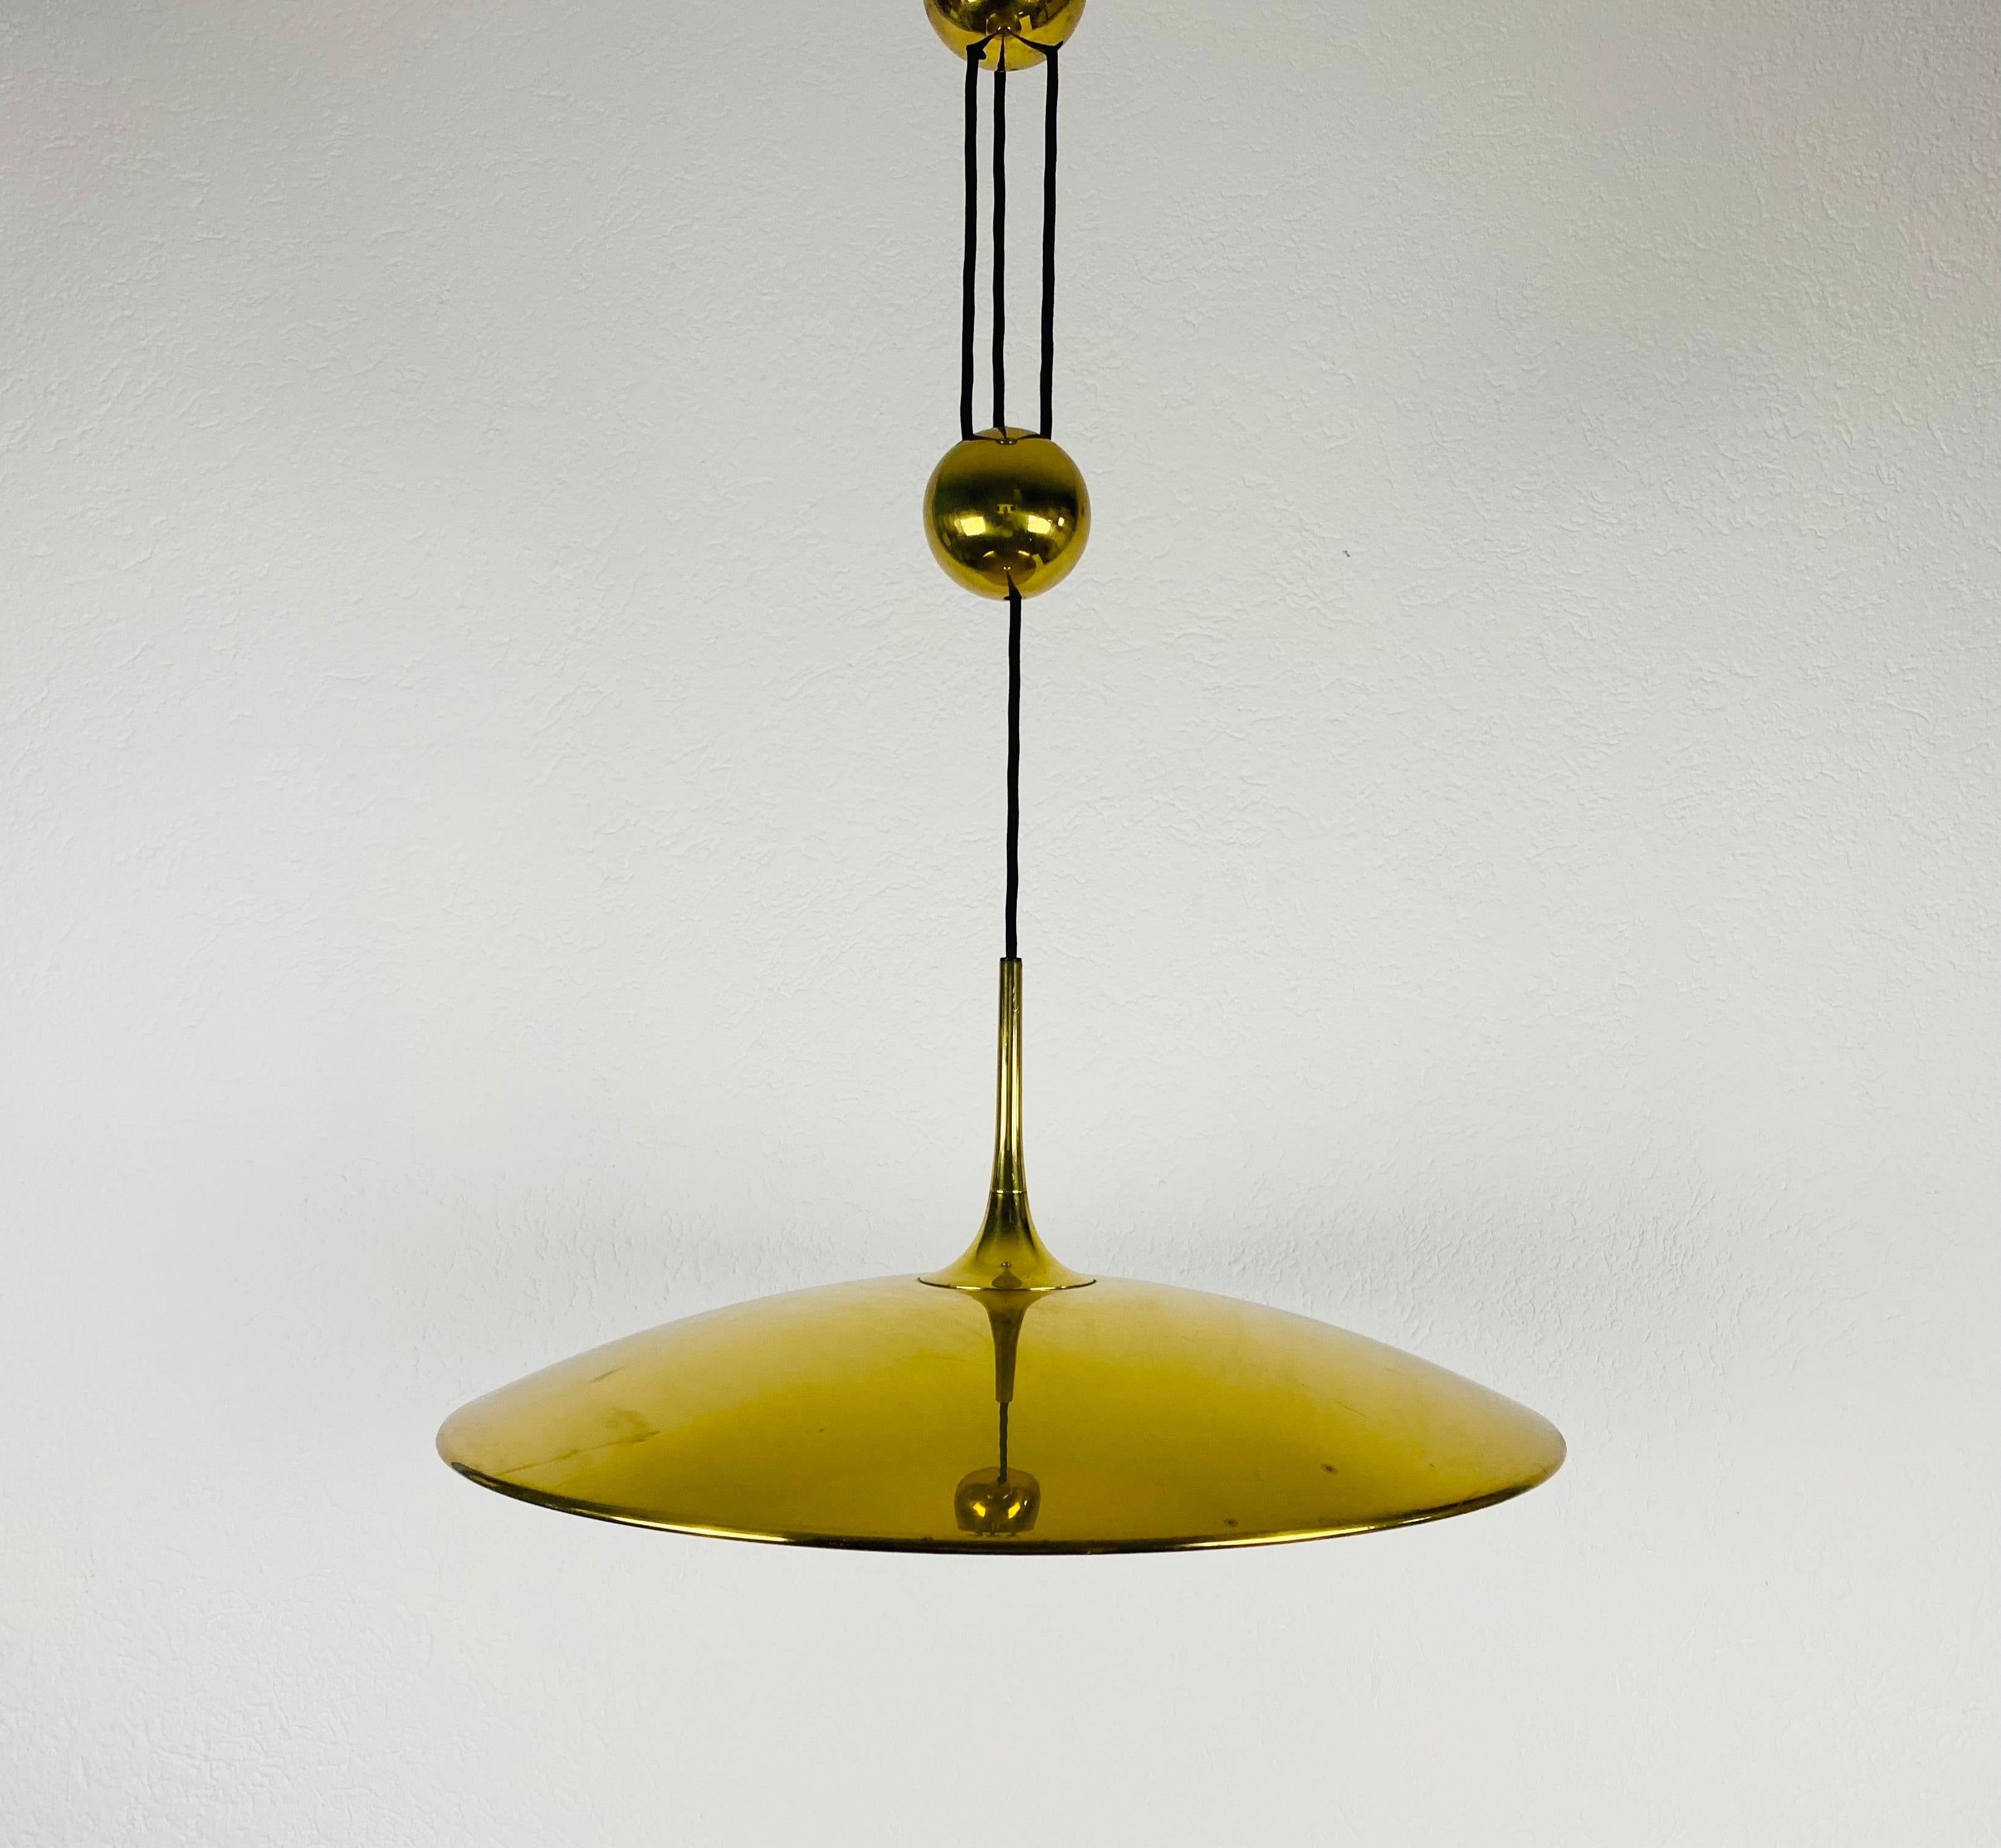 'Onos 55' Brass Pendant Lamp with Counterweight by Florian Schulz, 1970s Germany 3